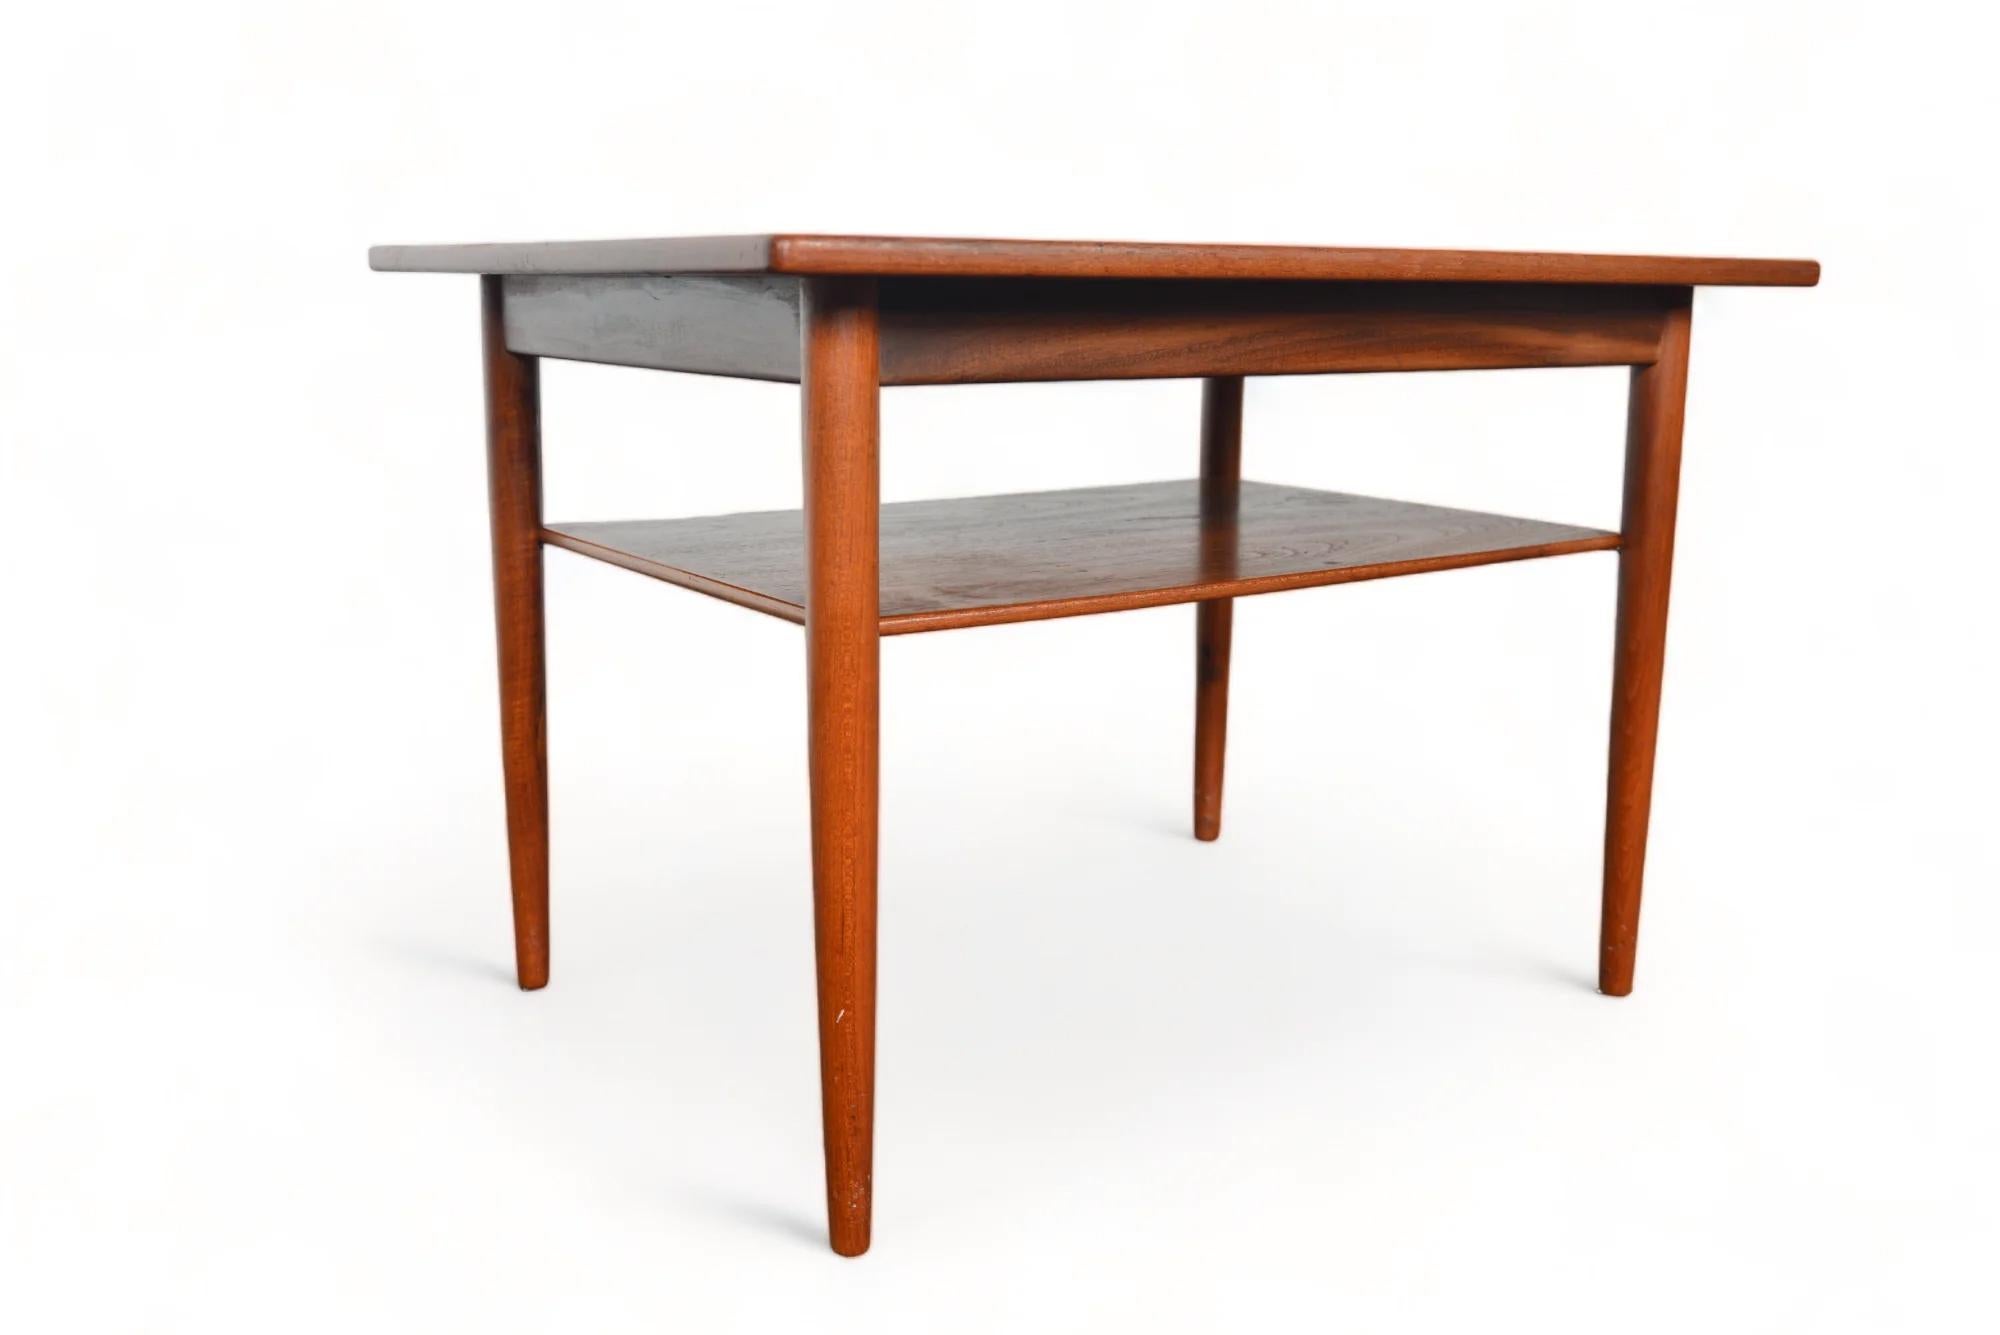 20th Century Danish Modern Teak Side Table With Lower Rack For Sale